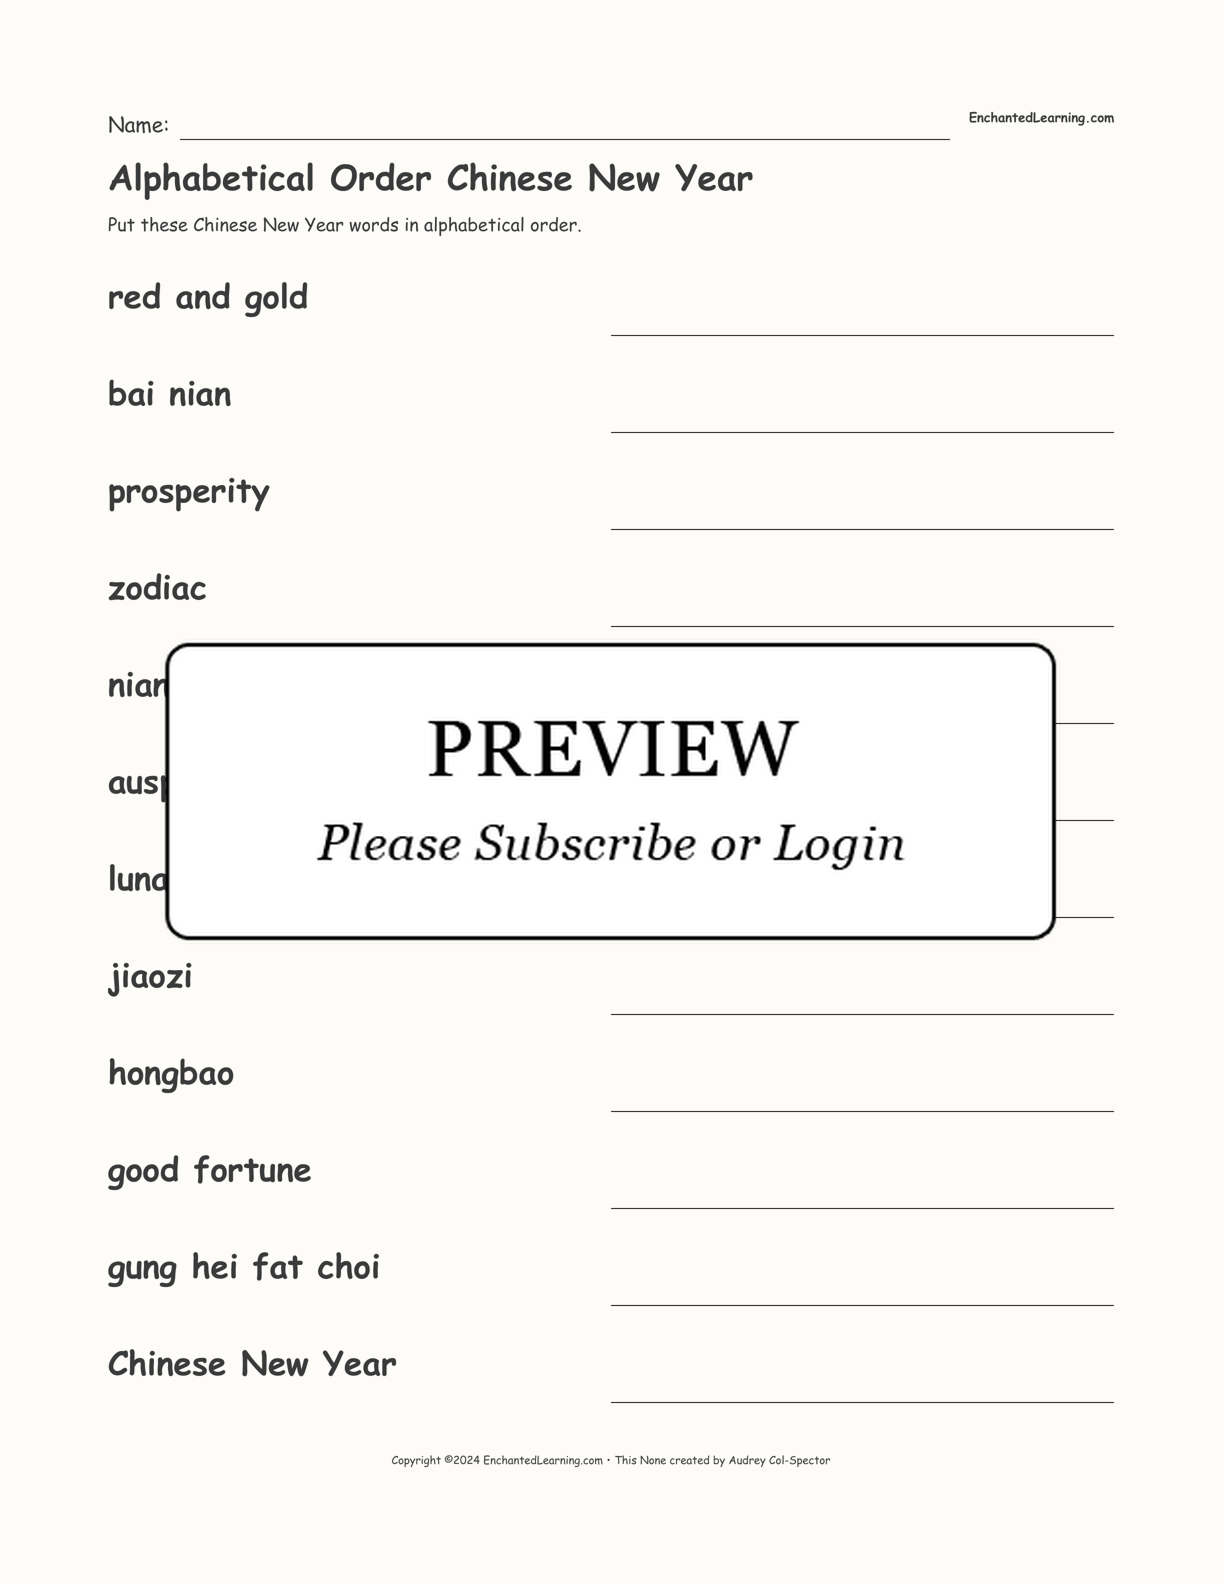 Alphabetical Order Chinese New Year interactive worksheet page 1